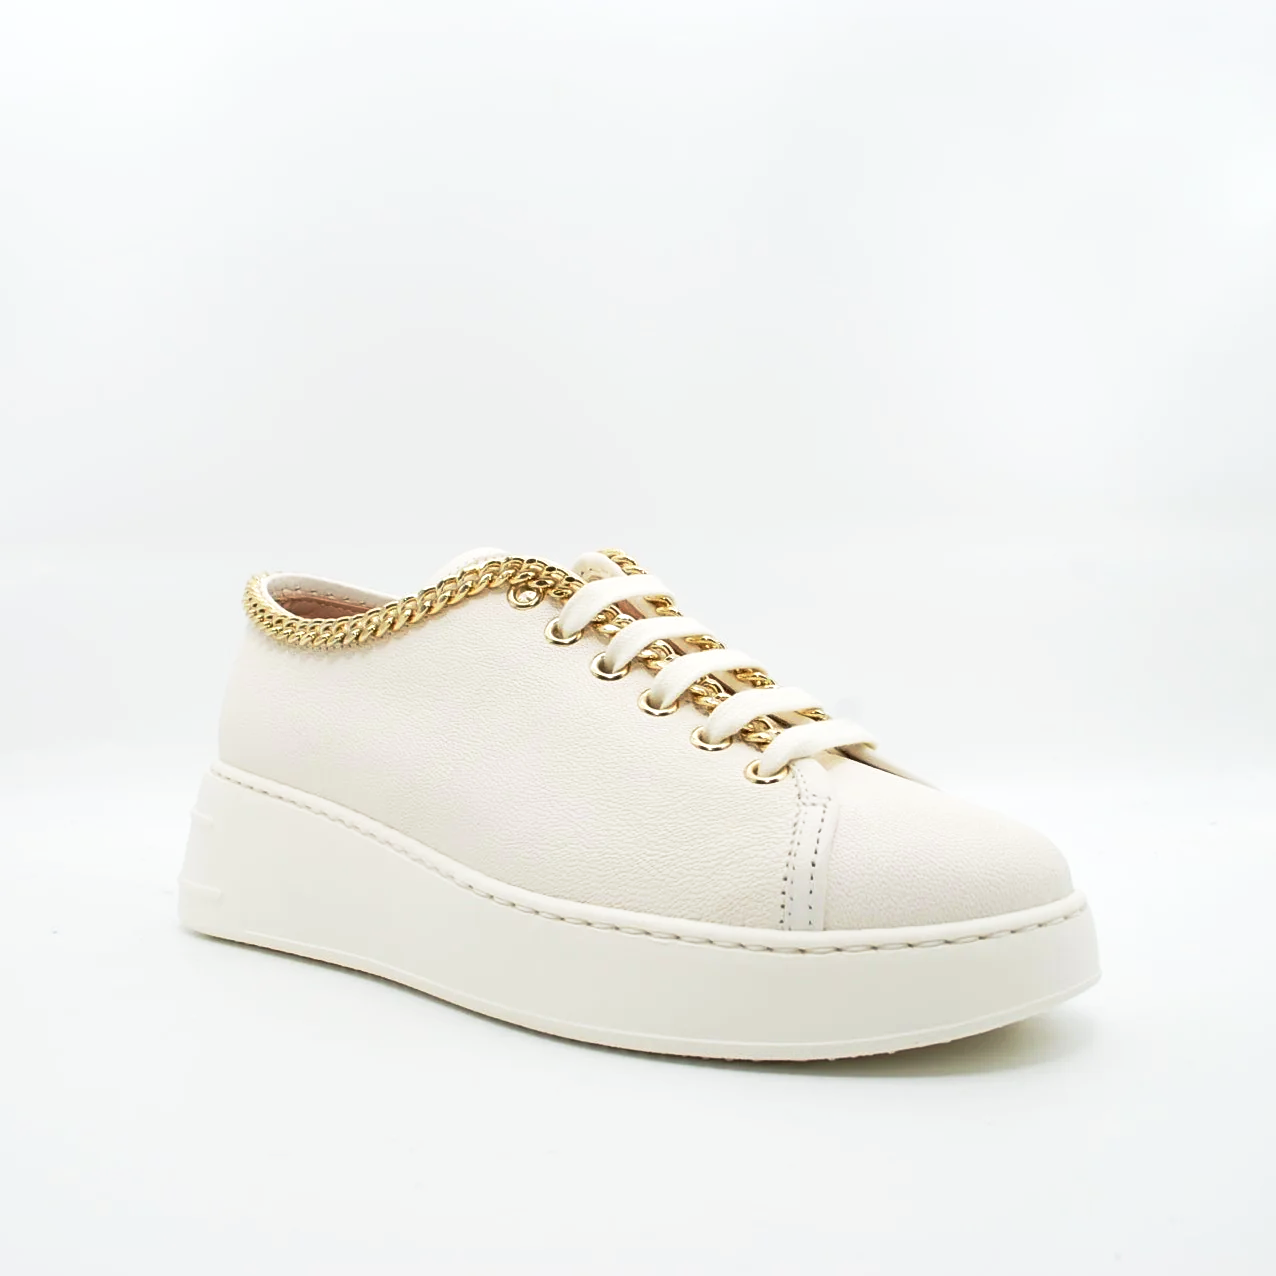 sneakers-stokton-in-pelle-sneakers-2_f0747460-af0c-47da-80ee-dabe9b7f14be.png